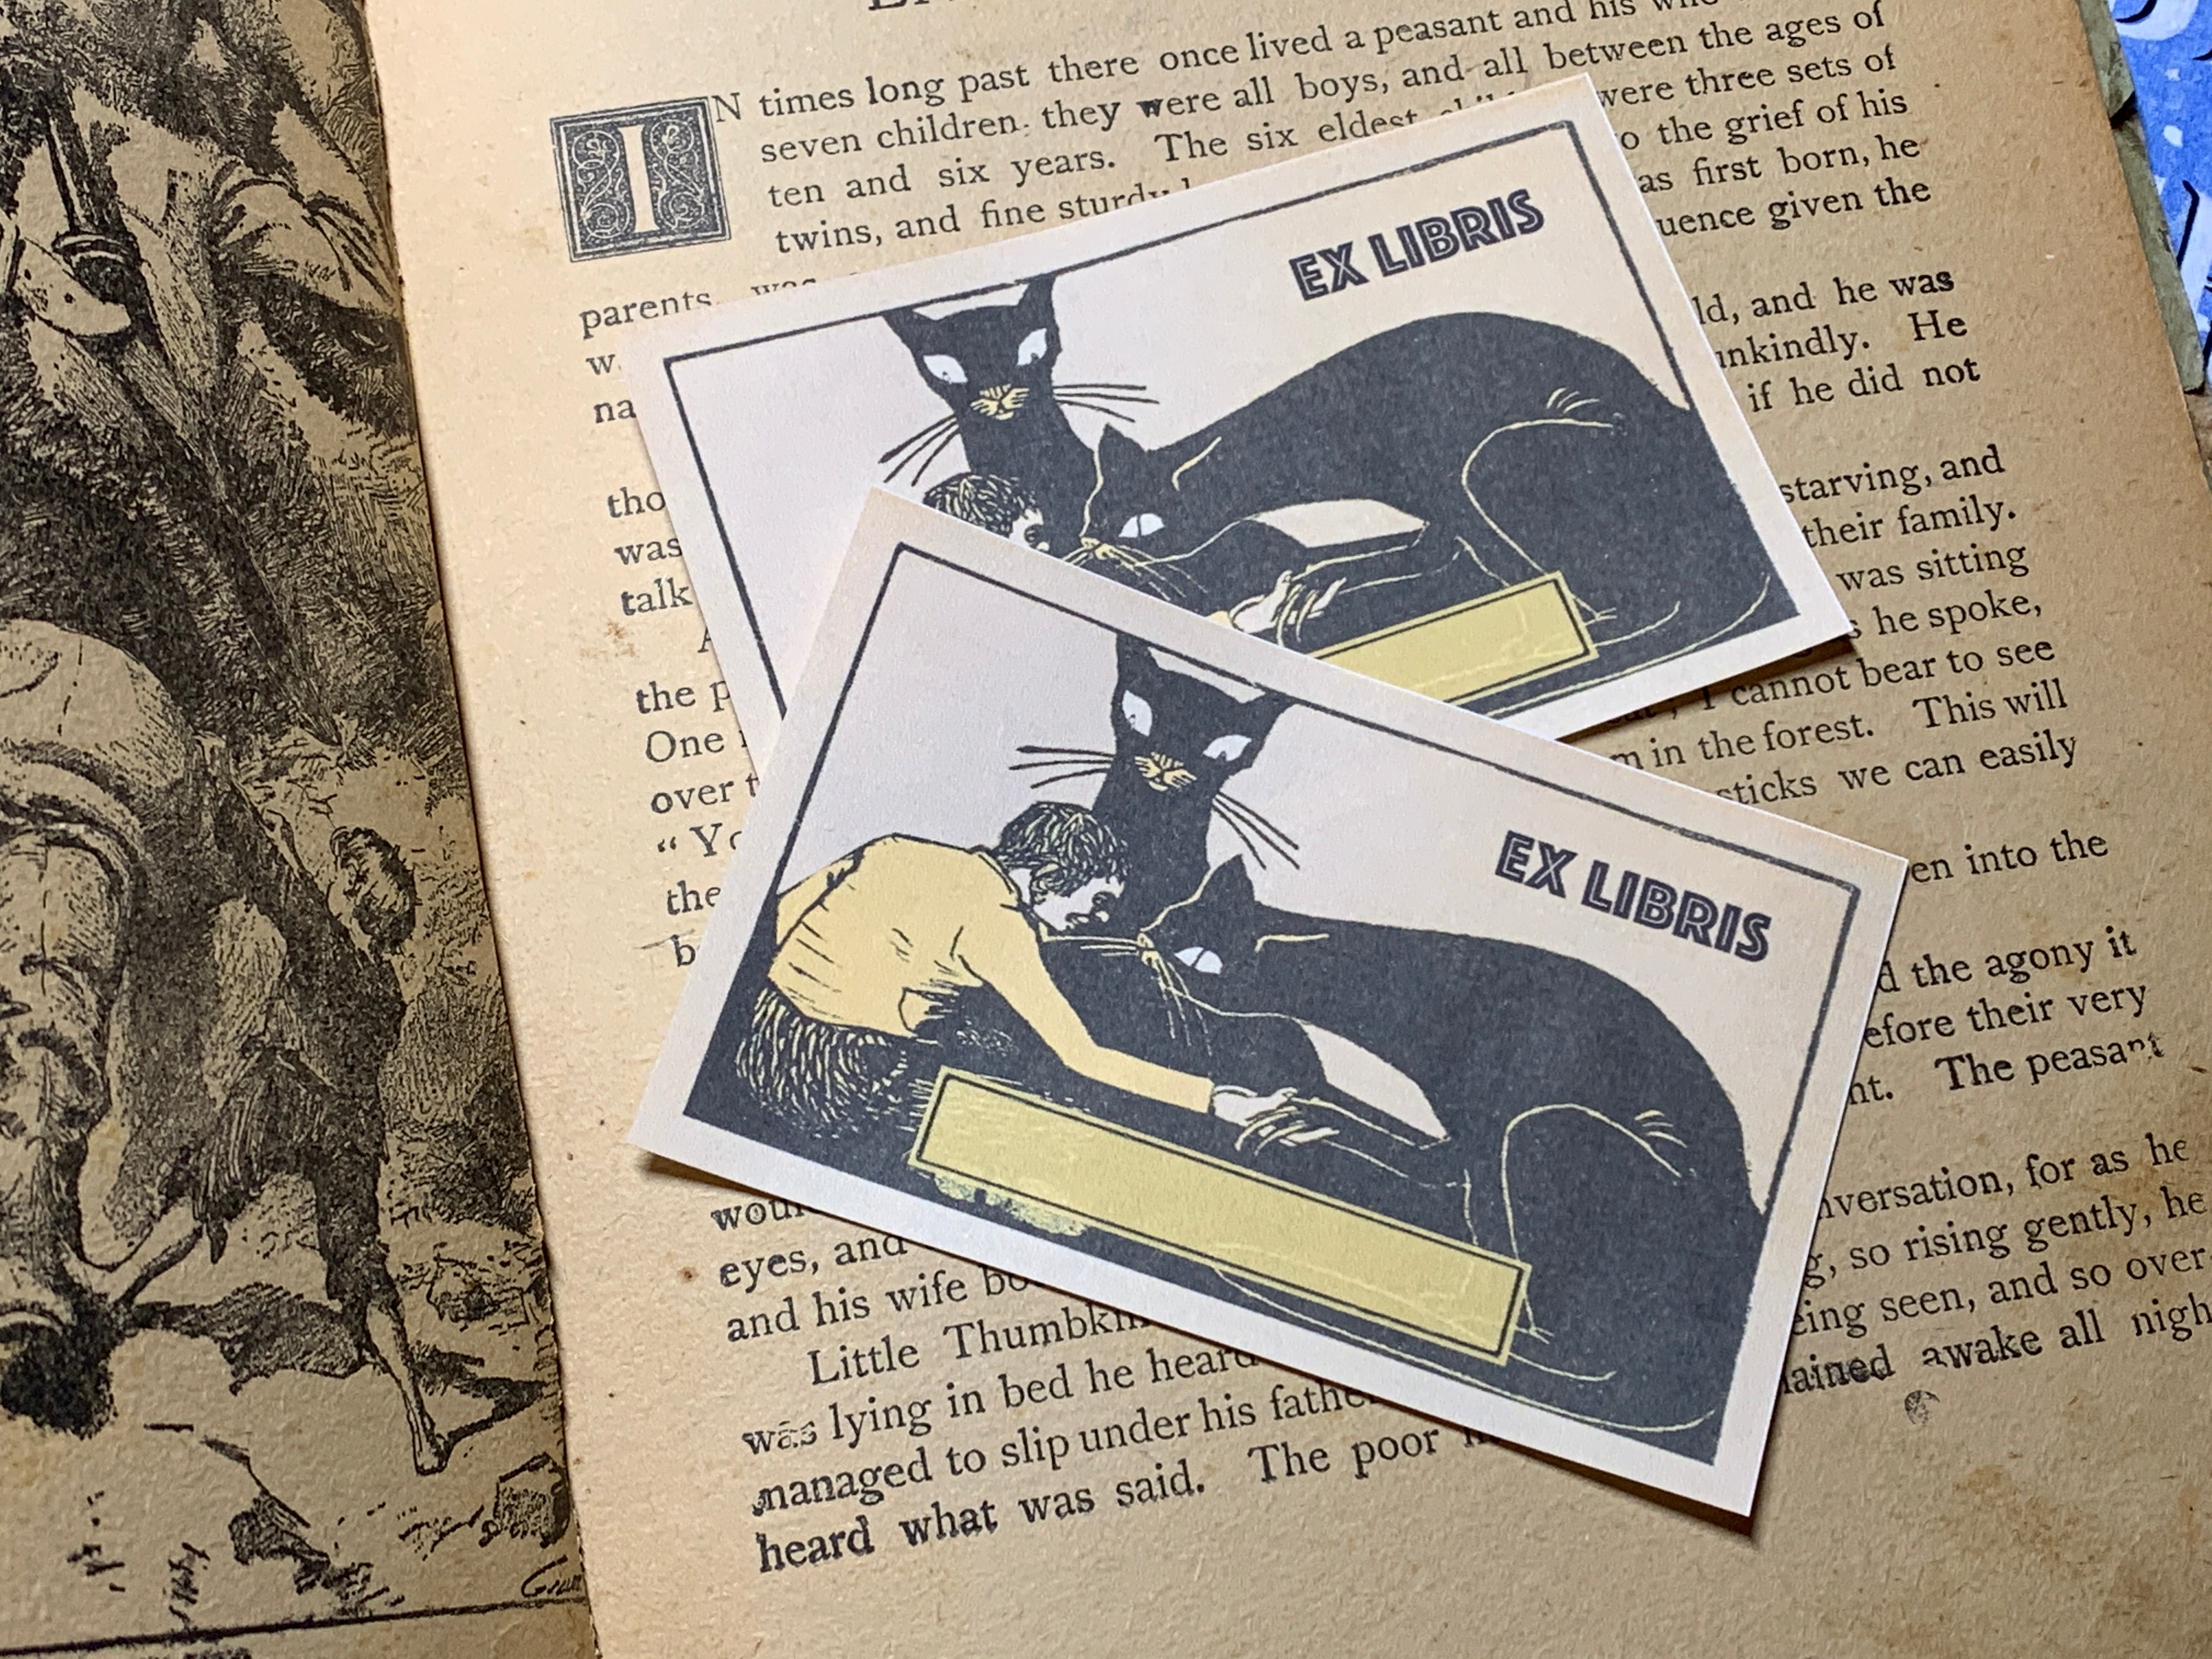 Cat Pact, Personalized Feline Ex-Libris Bookplates, Crafted on Traditional Gummed Paper, 4in x 2.5in, Set of 30